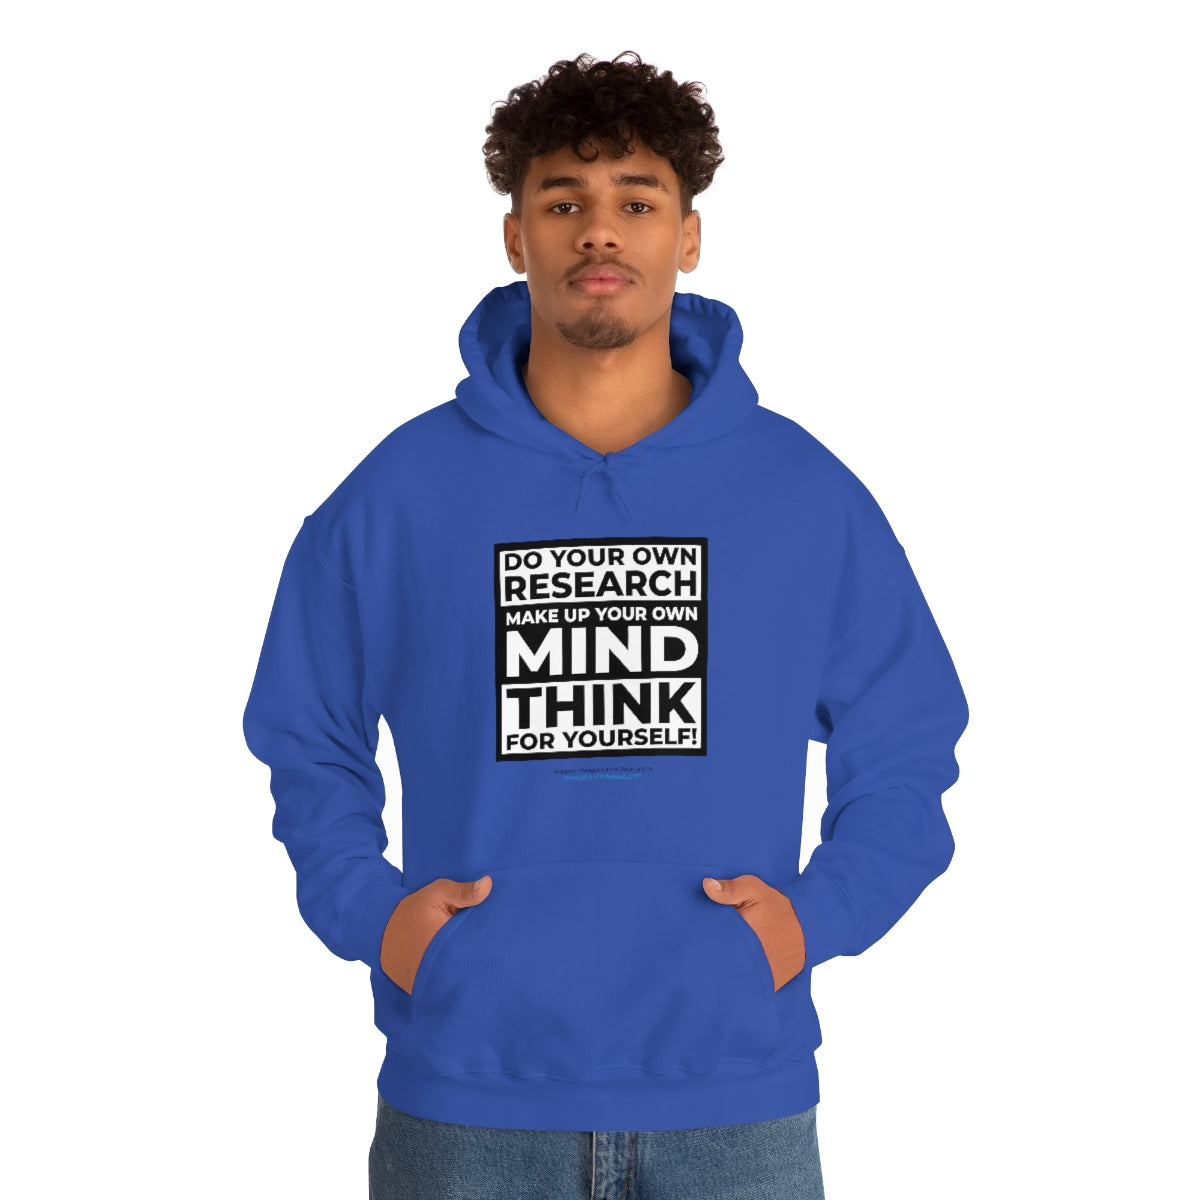 'Think for Yourself' Hooded Sweatshirt (8 colors)